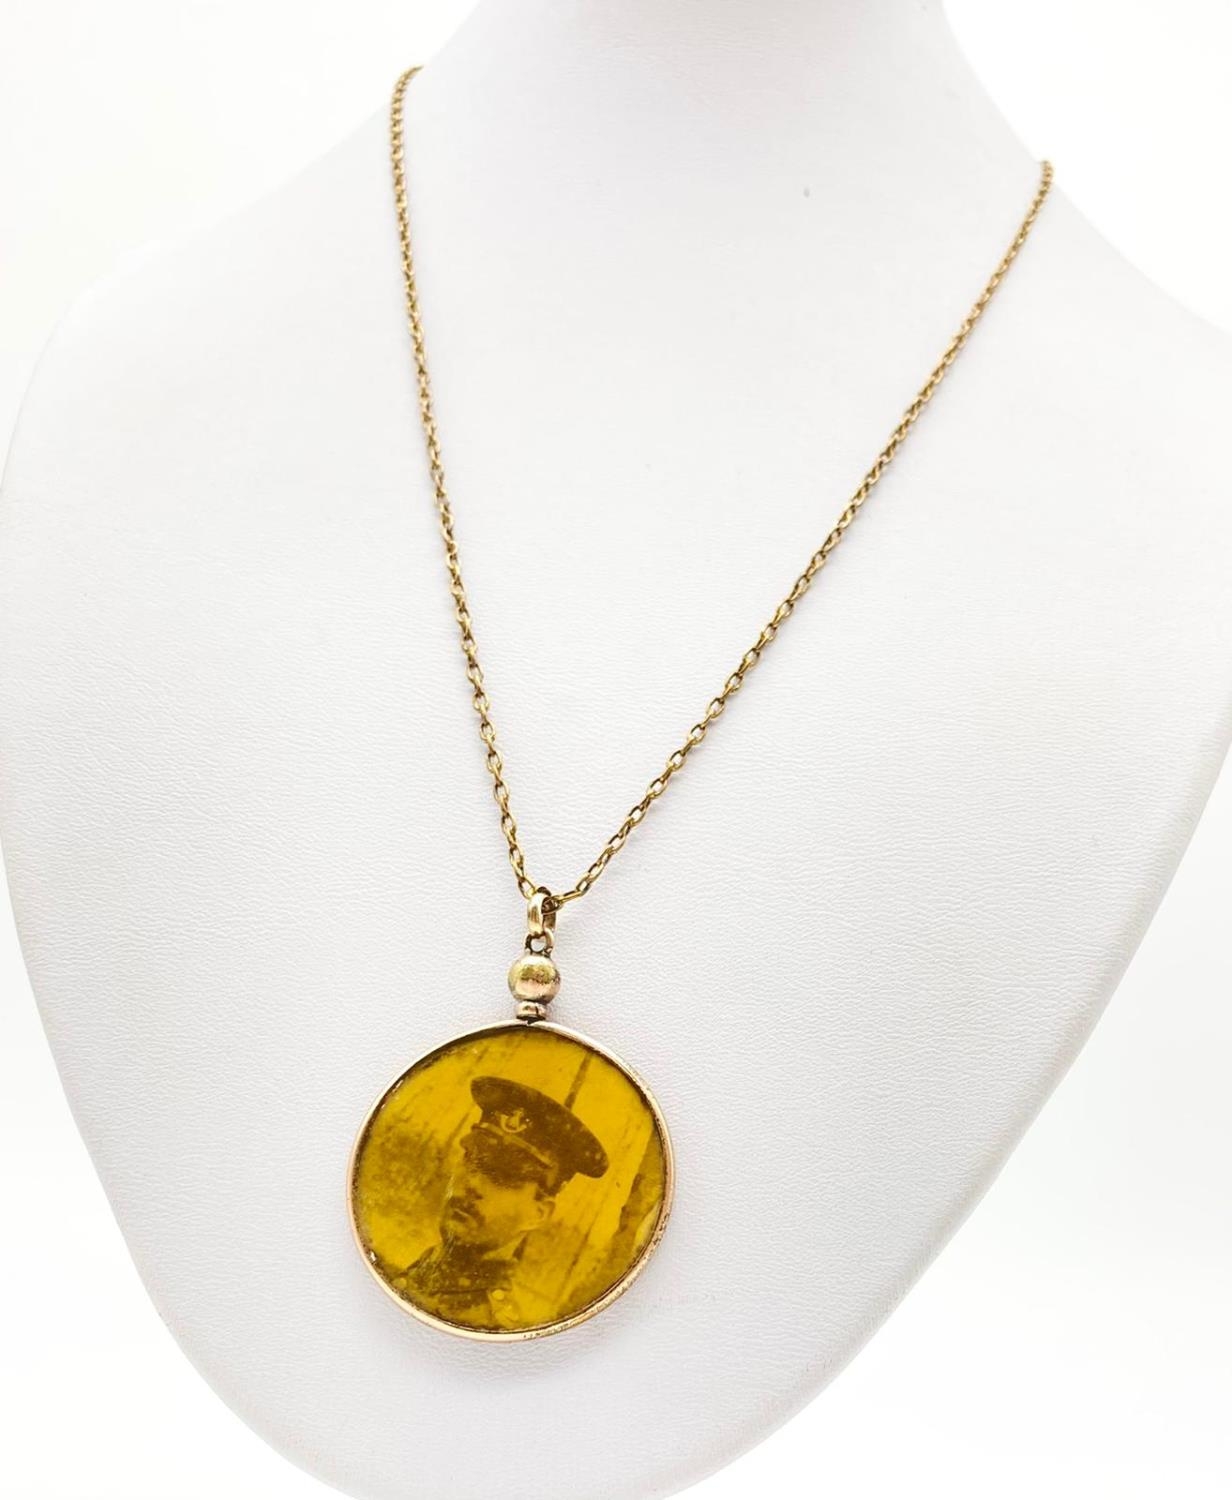 Double-Sided WW1 Soldiers Pendant on Yellow Metal. Necklace - 48cm. - Image 2 of 4